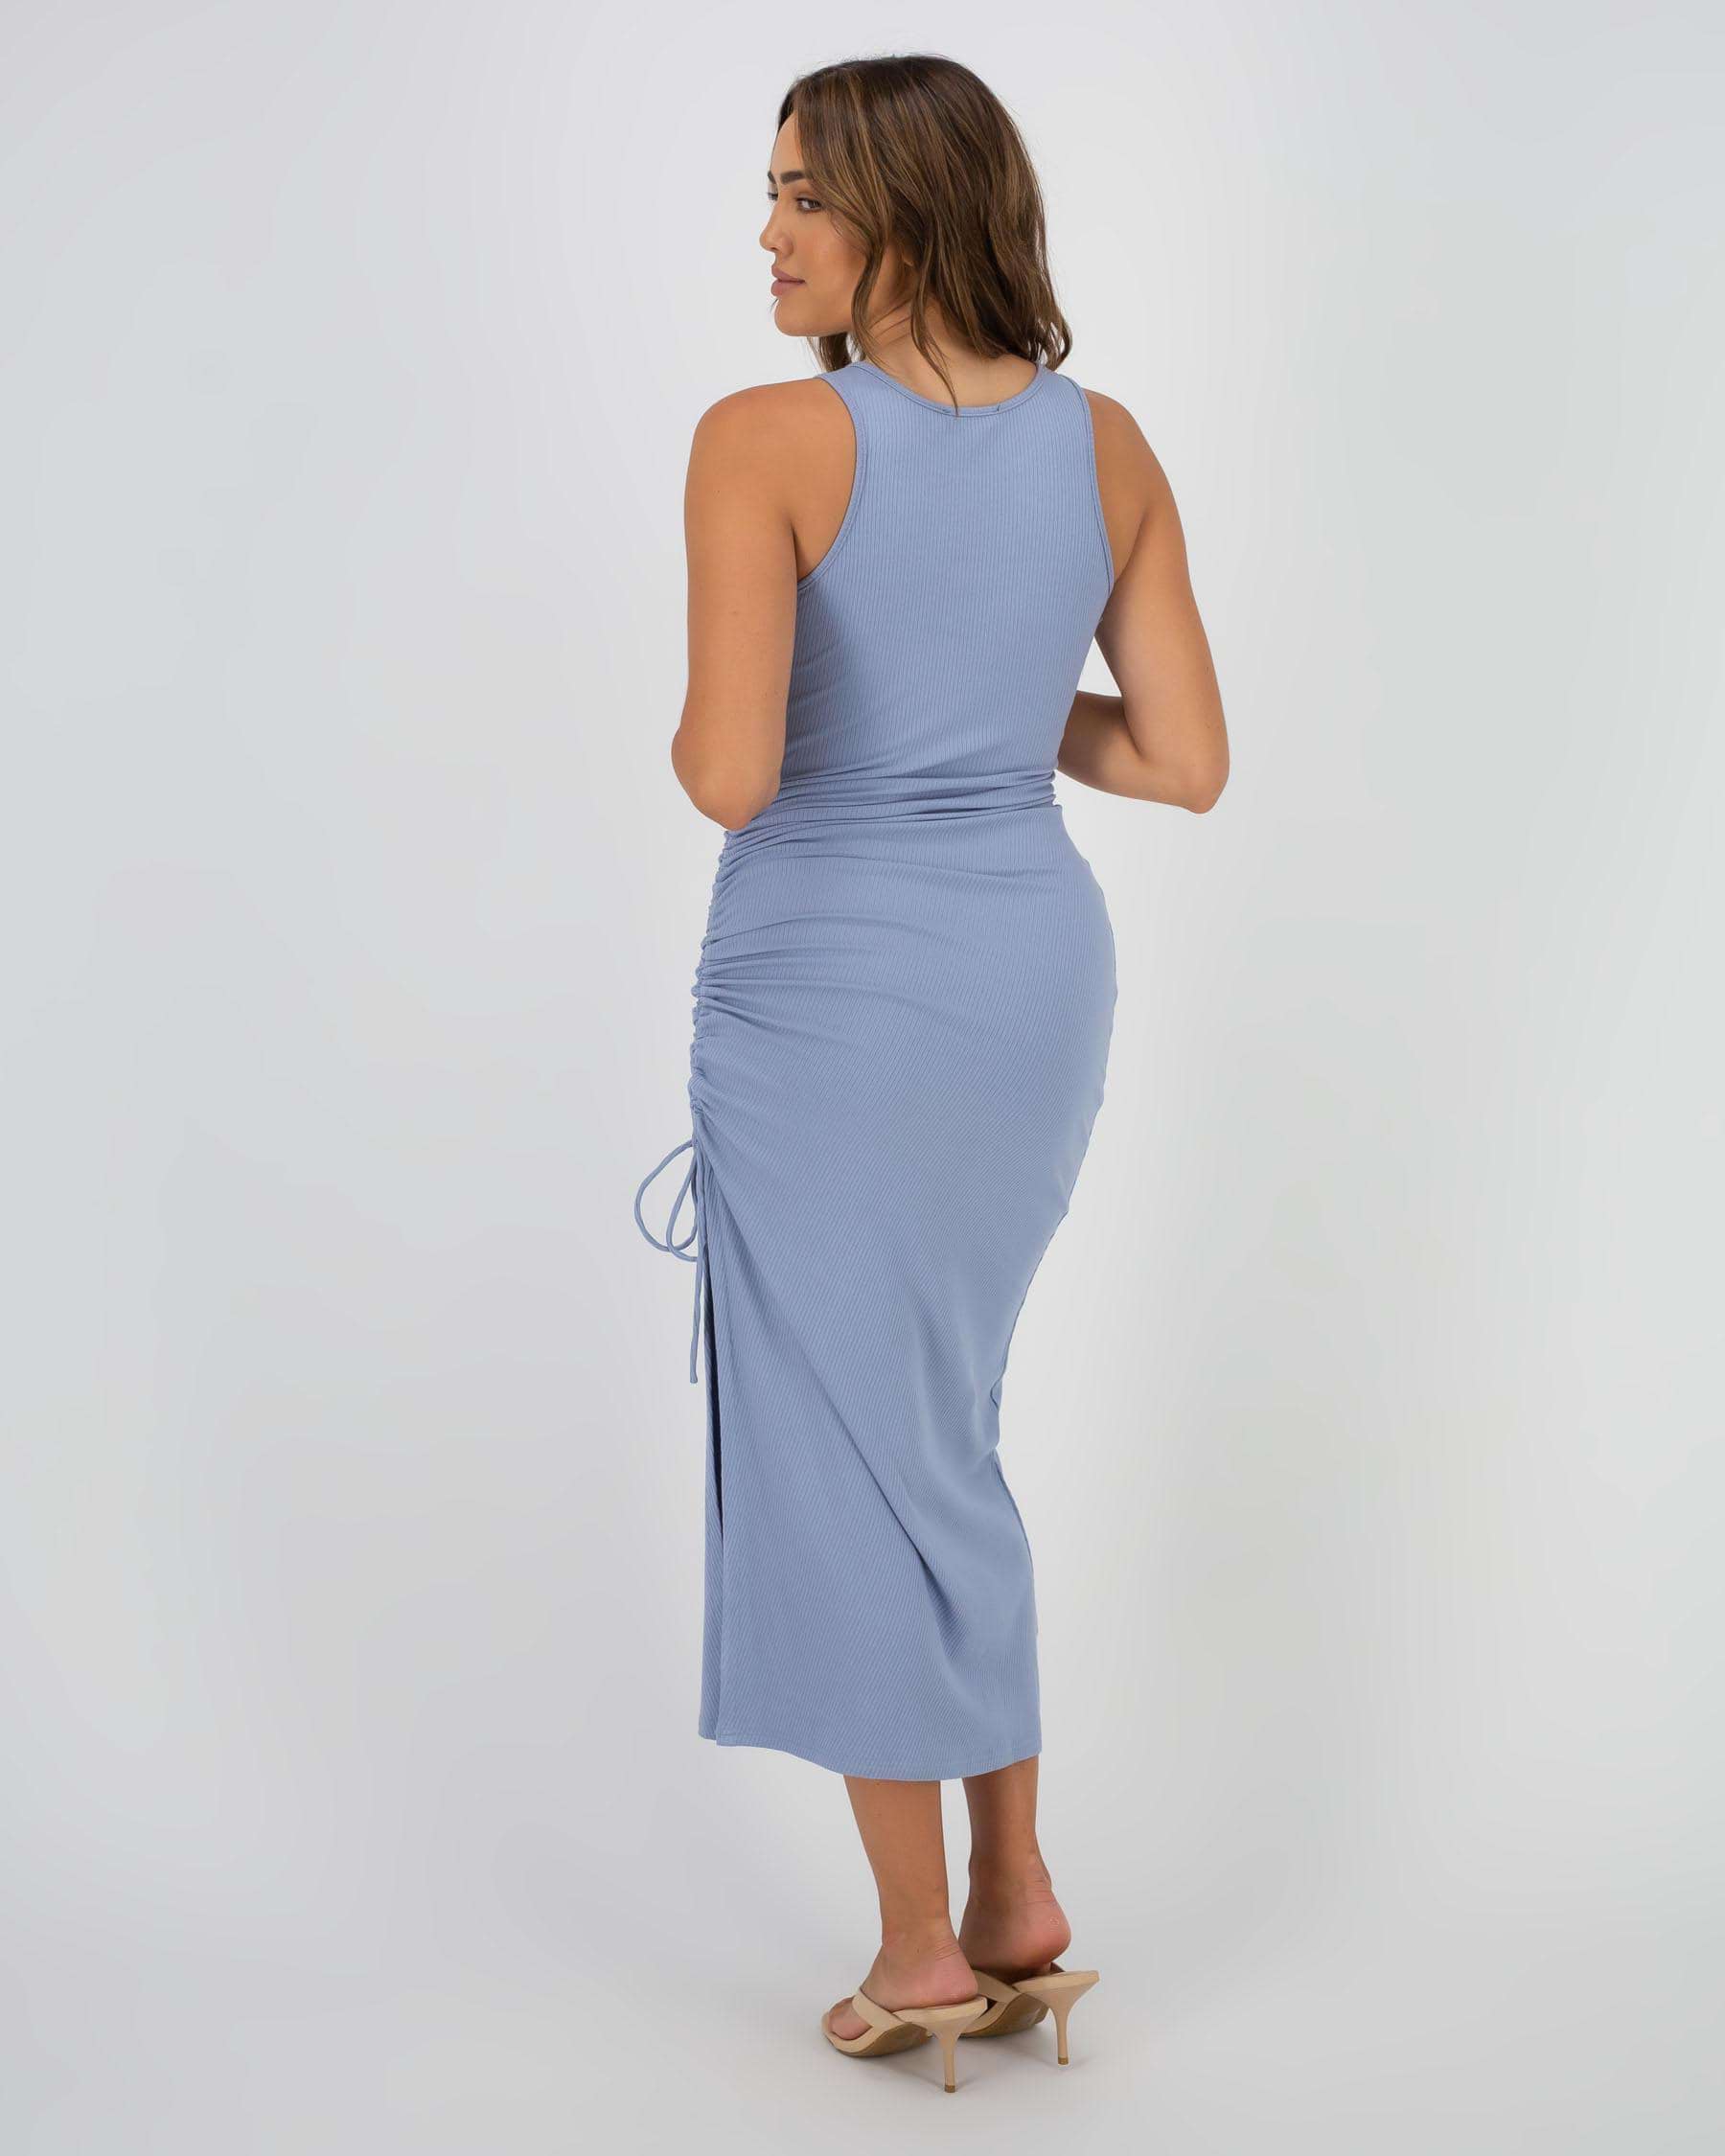 Ava And Ever Ivy Midi Dress In Pale Blue - Fast Shipping & Easy Returns ...